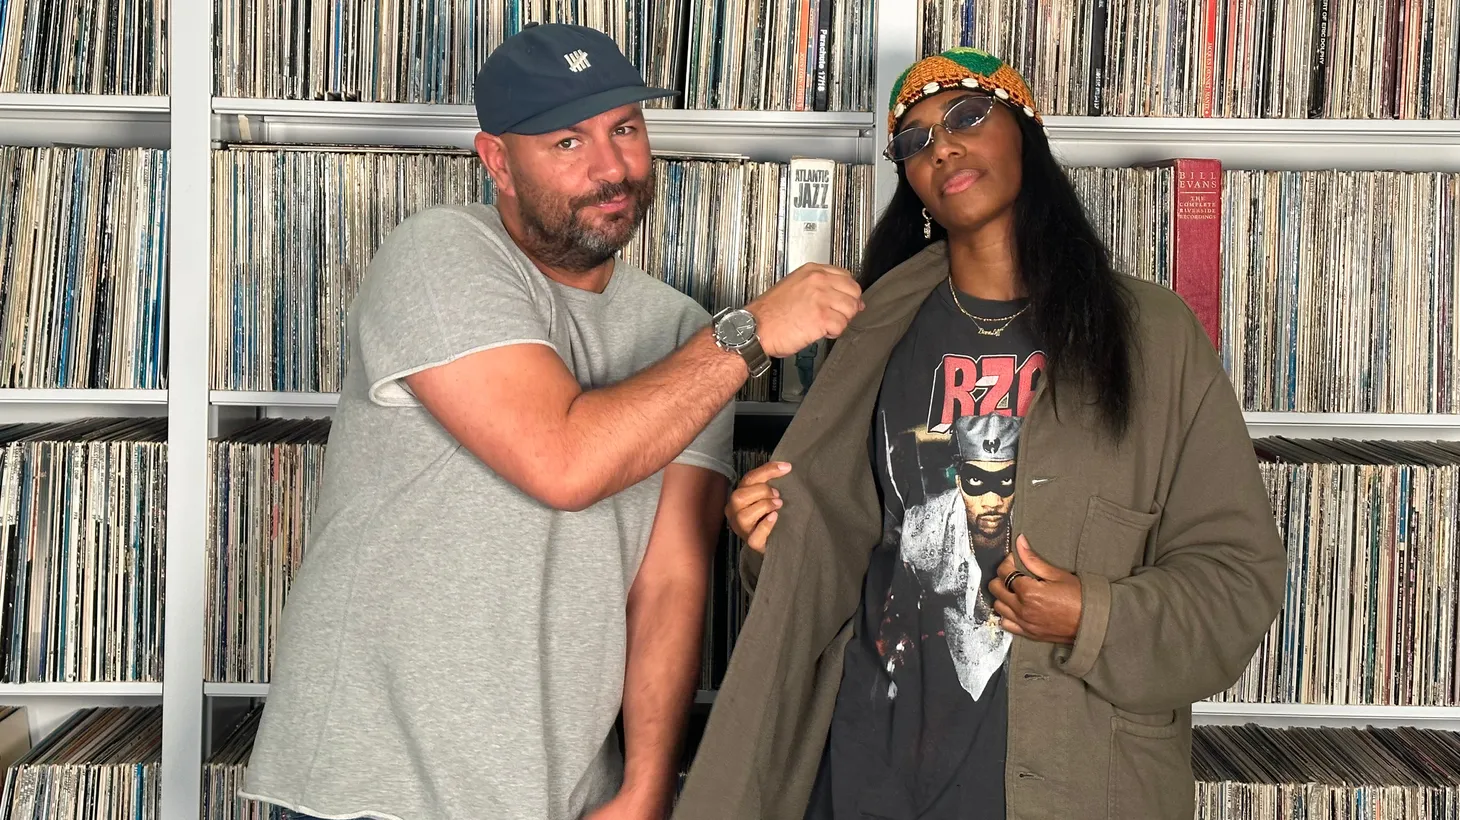 Spinning gold and serving lewks — Santigold brings her disparate influences to KCRW HQ.